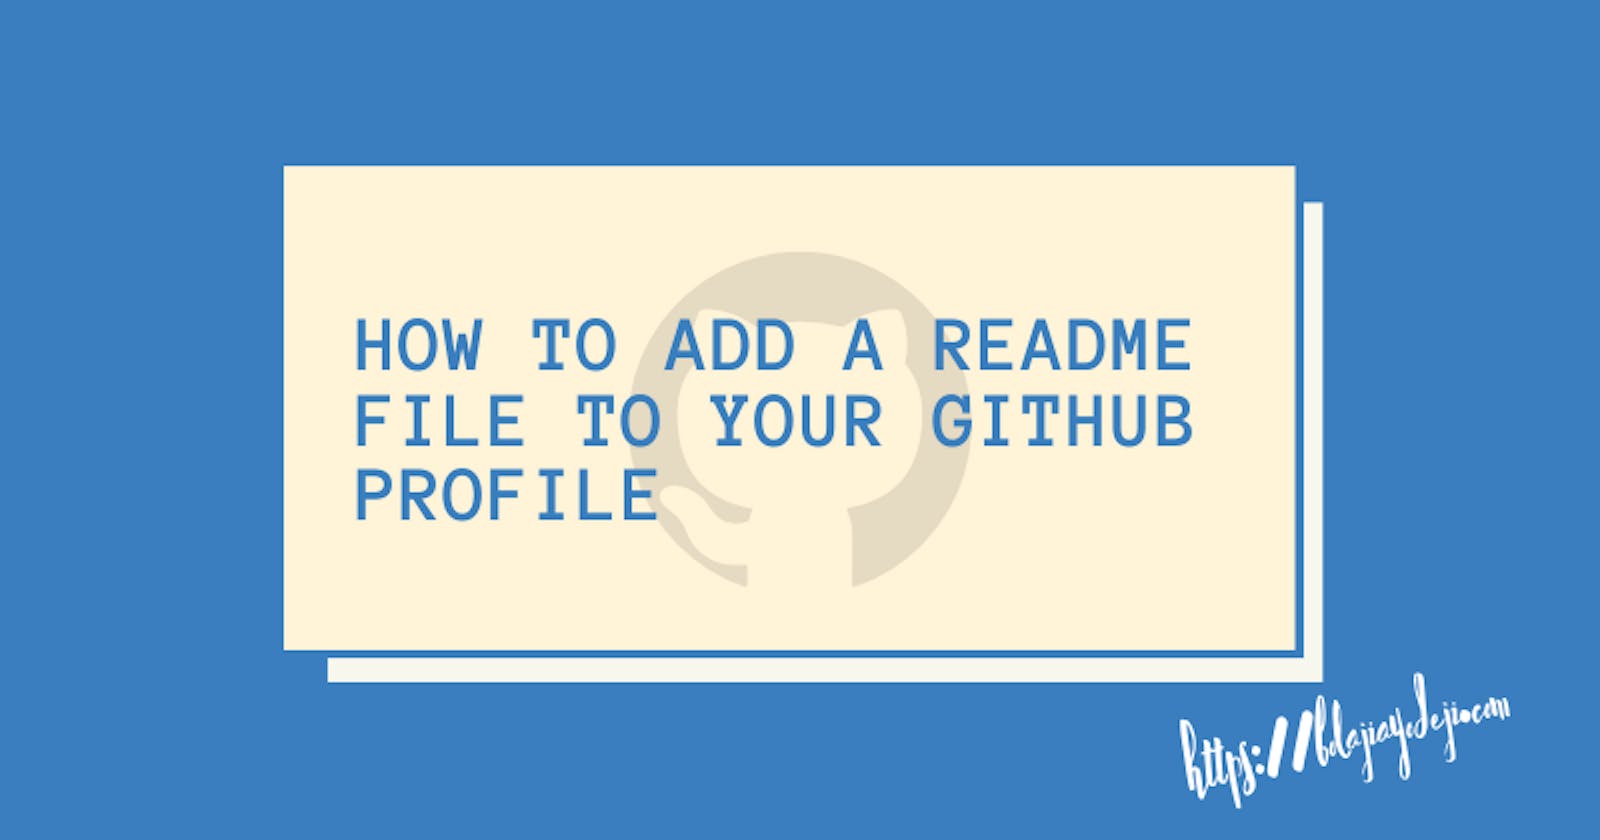 How to Add a README file to your GitHub Profile